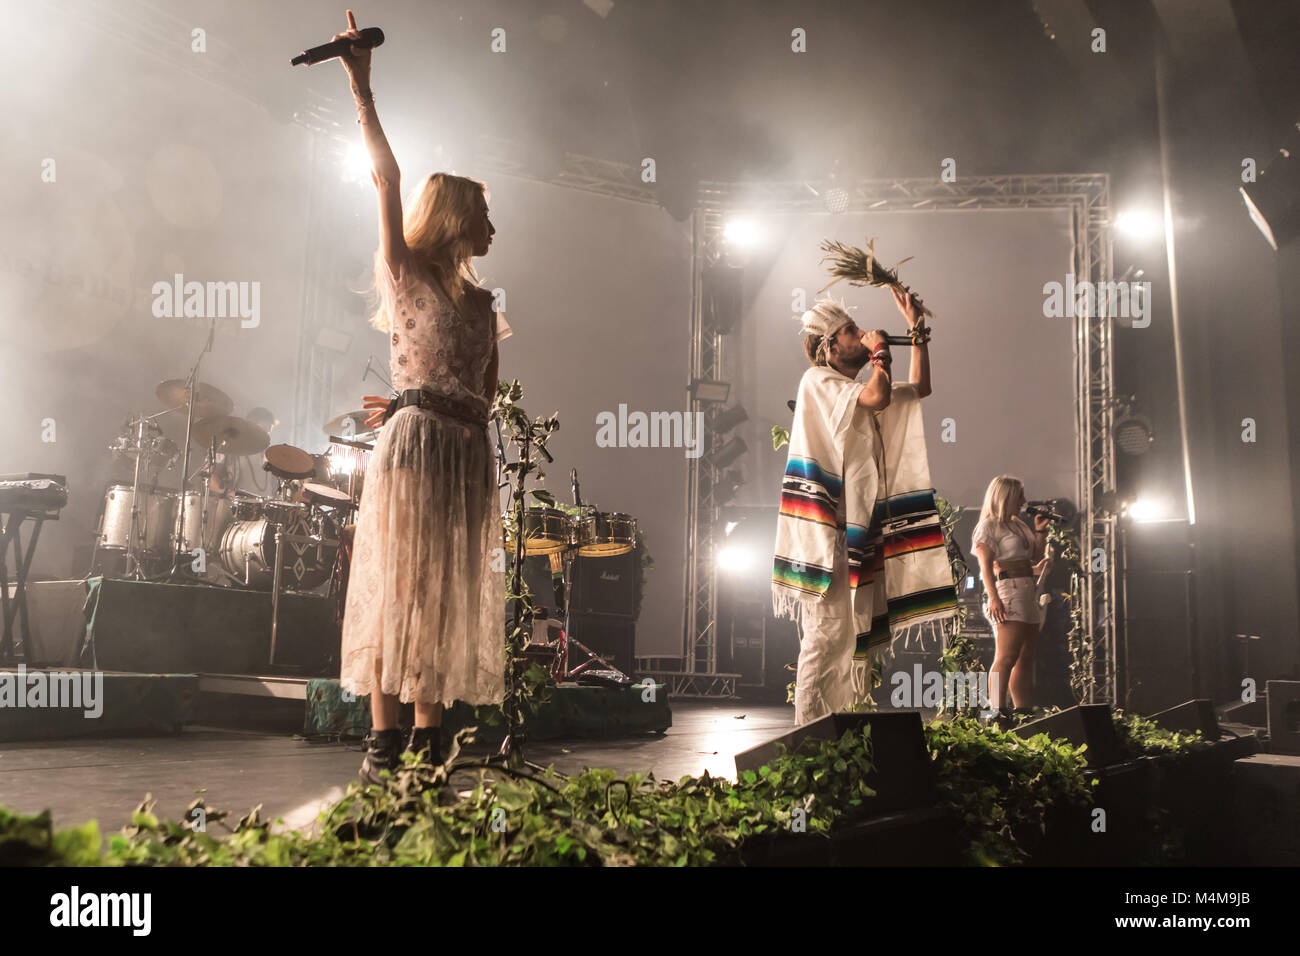 Crystal Fighters Stockfoto